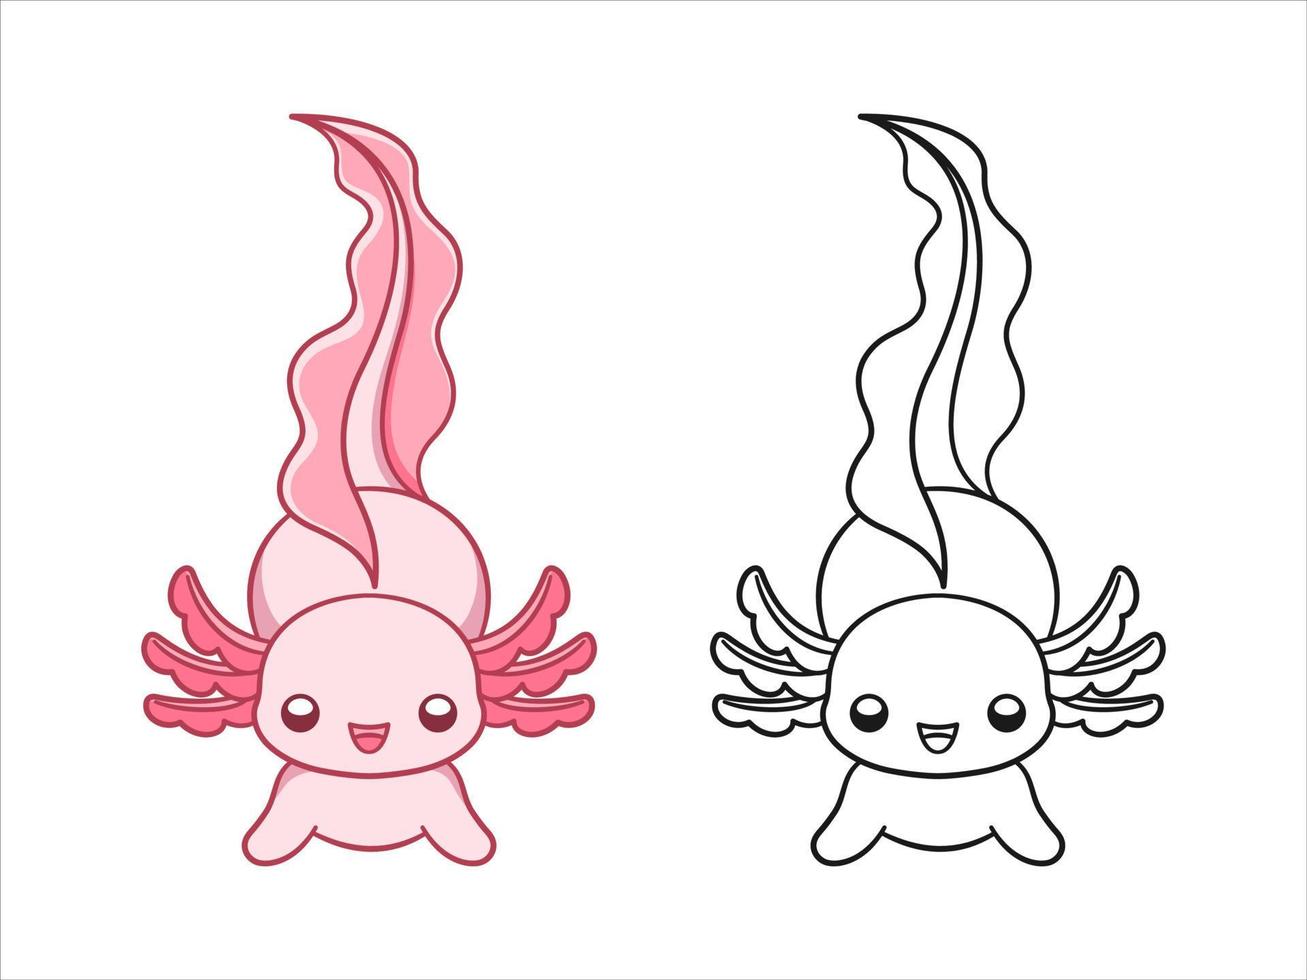 Happy axolotl cartoon colored and line art vector illustration set. Cute underwater aquatic animal design. Easy simple coloring book page activity for kids.